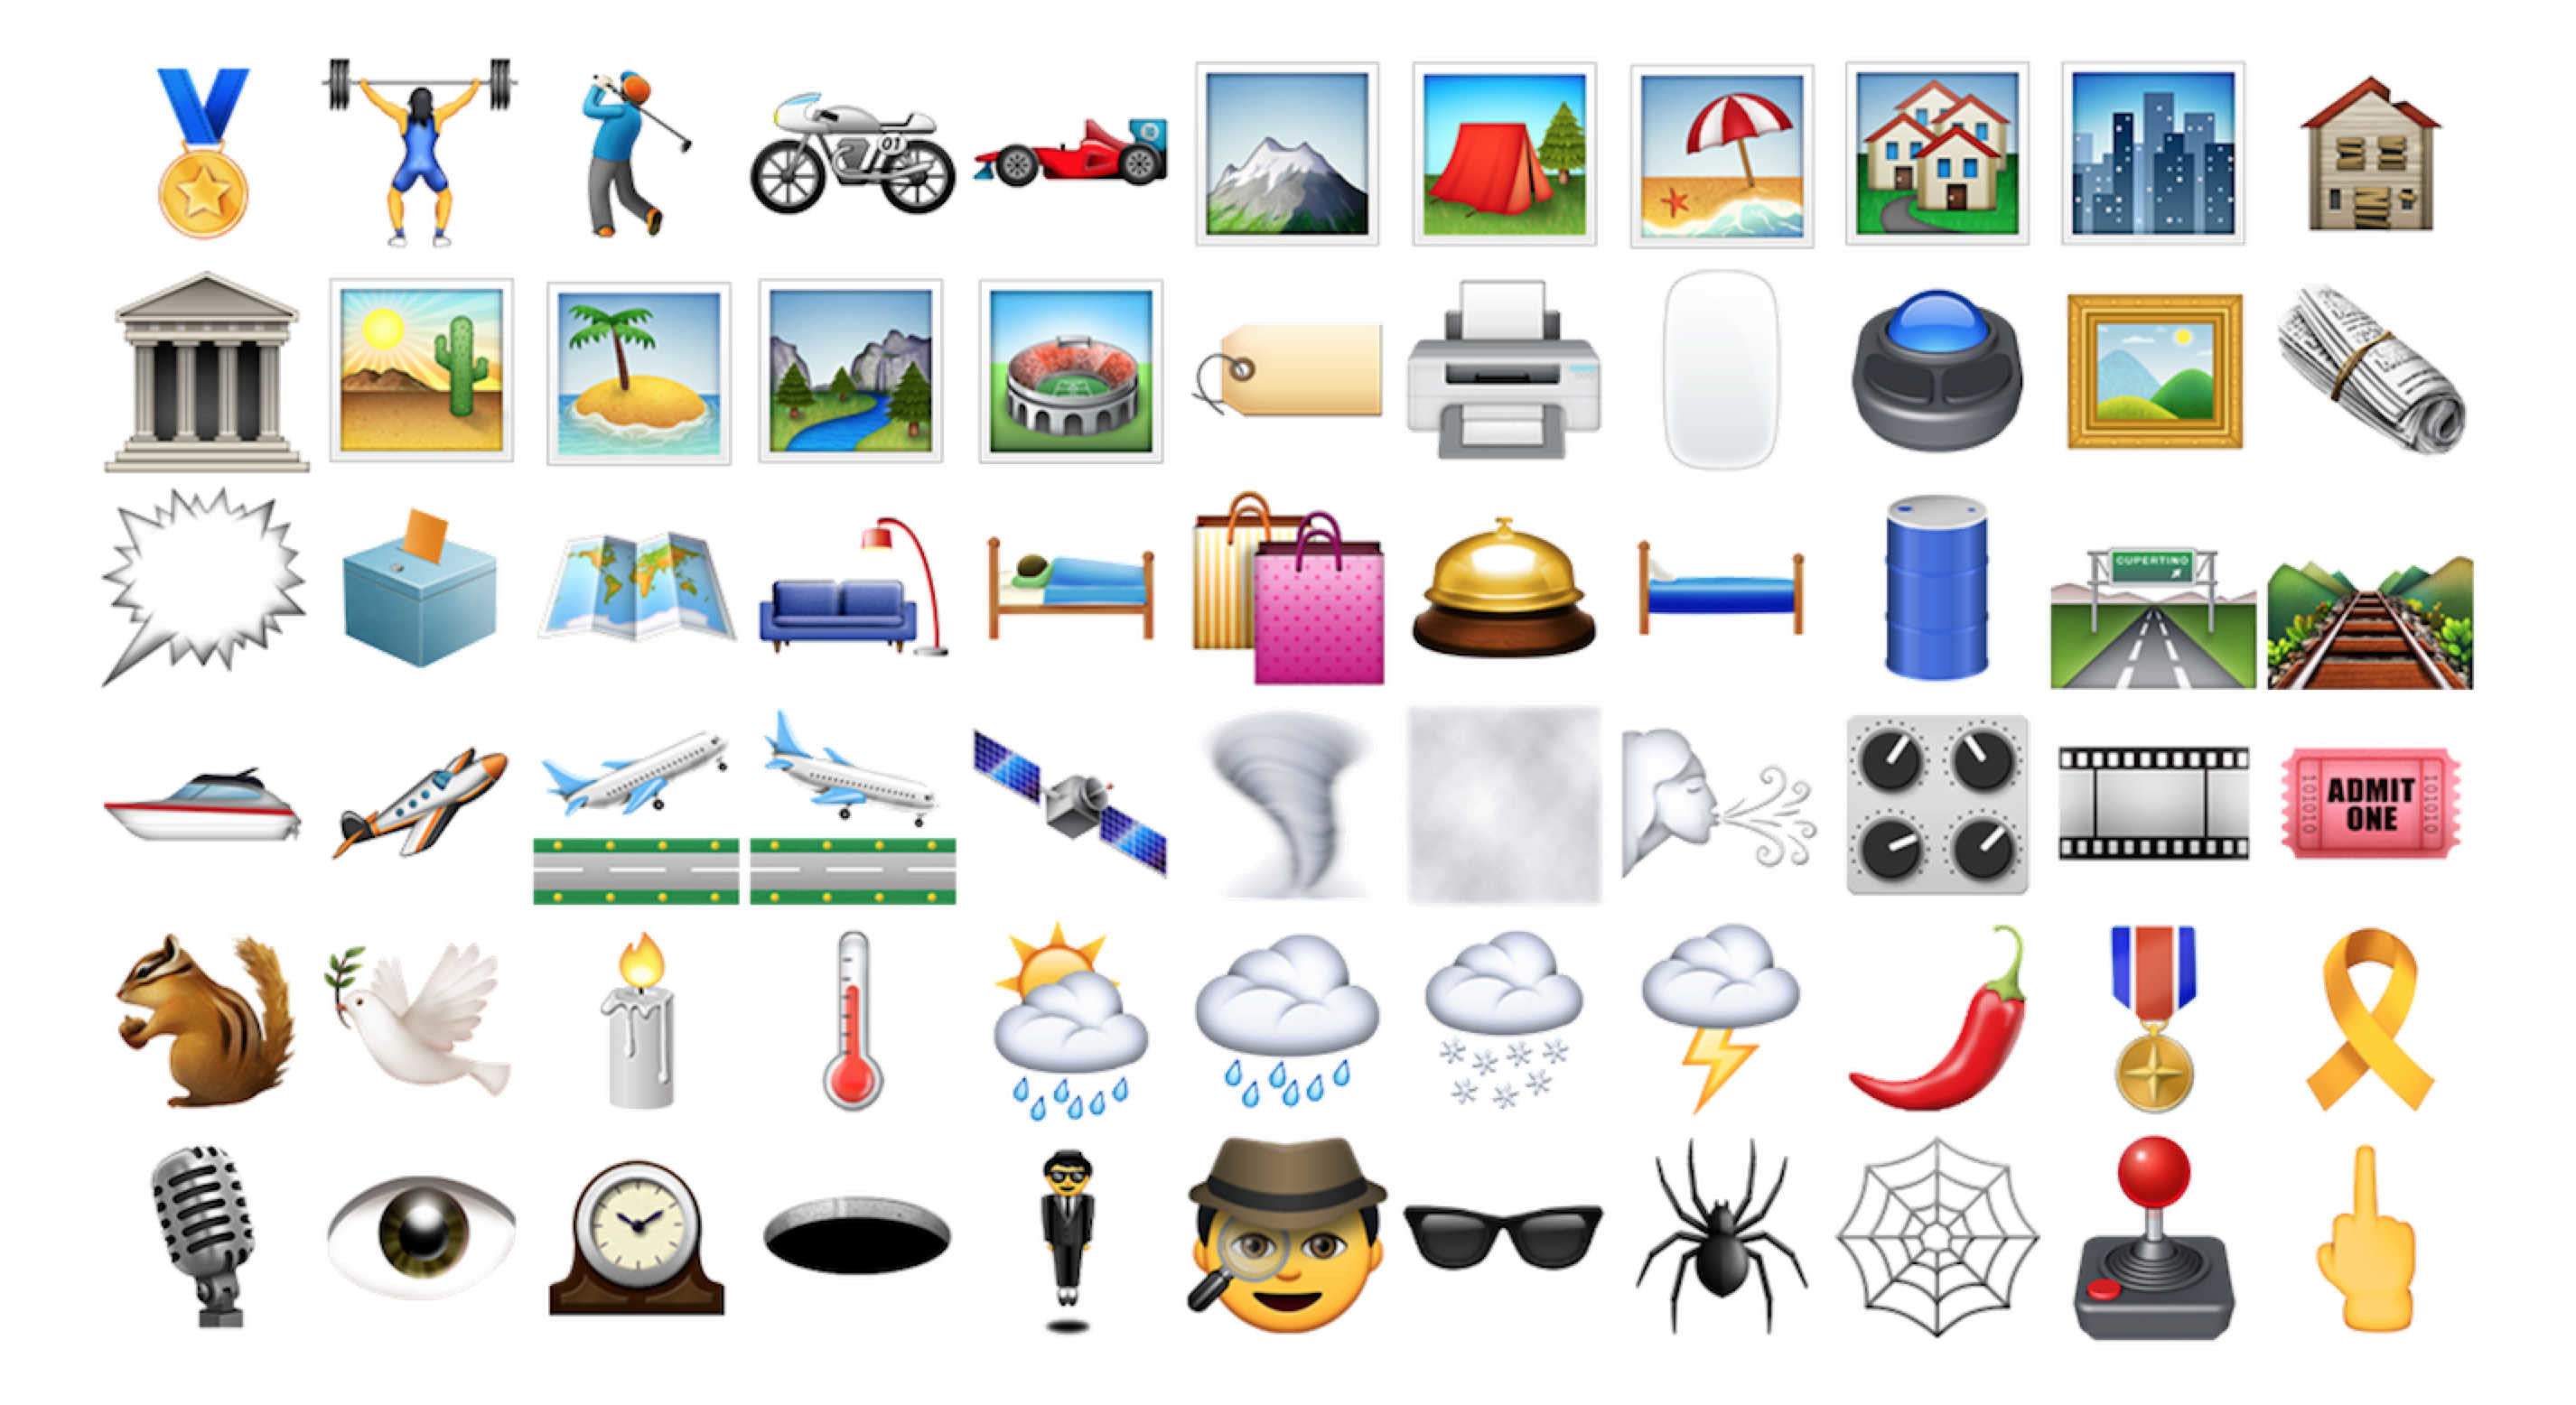 2852x1556 iOS 9.1 is here with new emoji, wallpapers and more | Cult of Mac